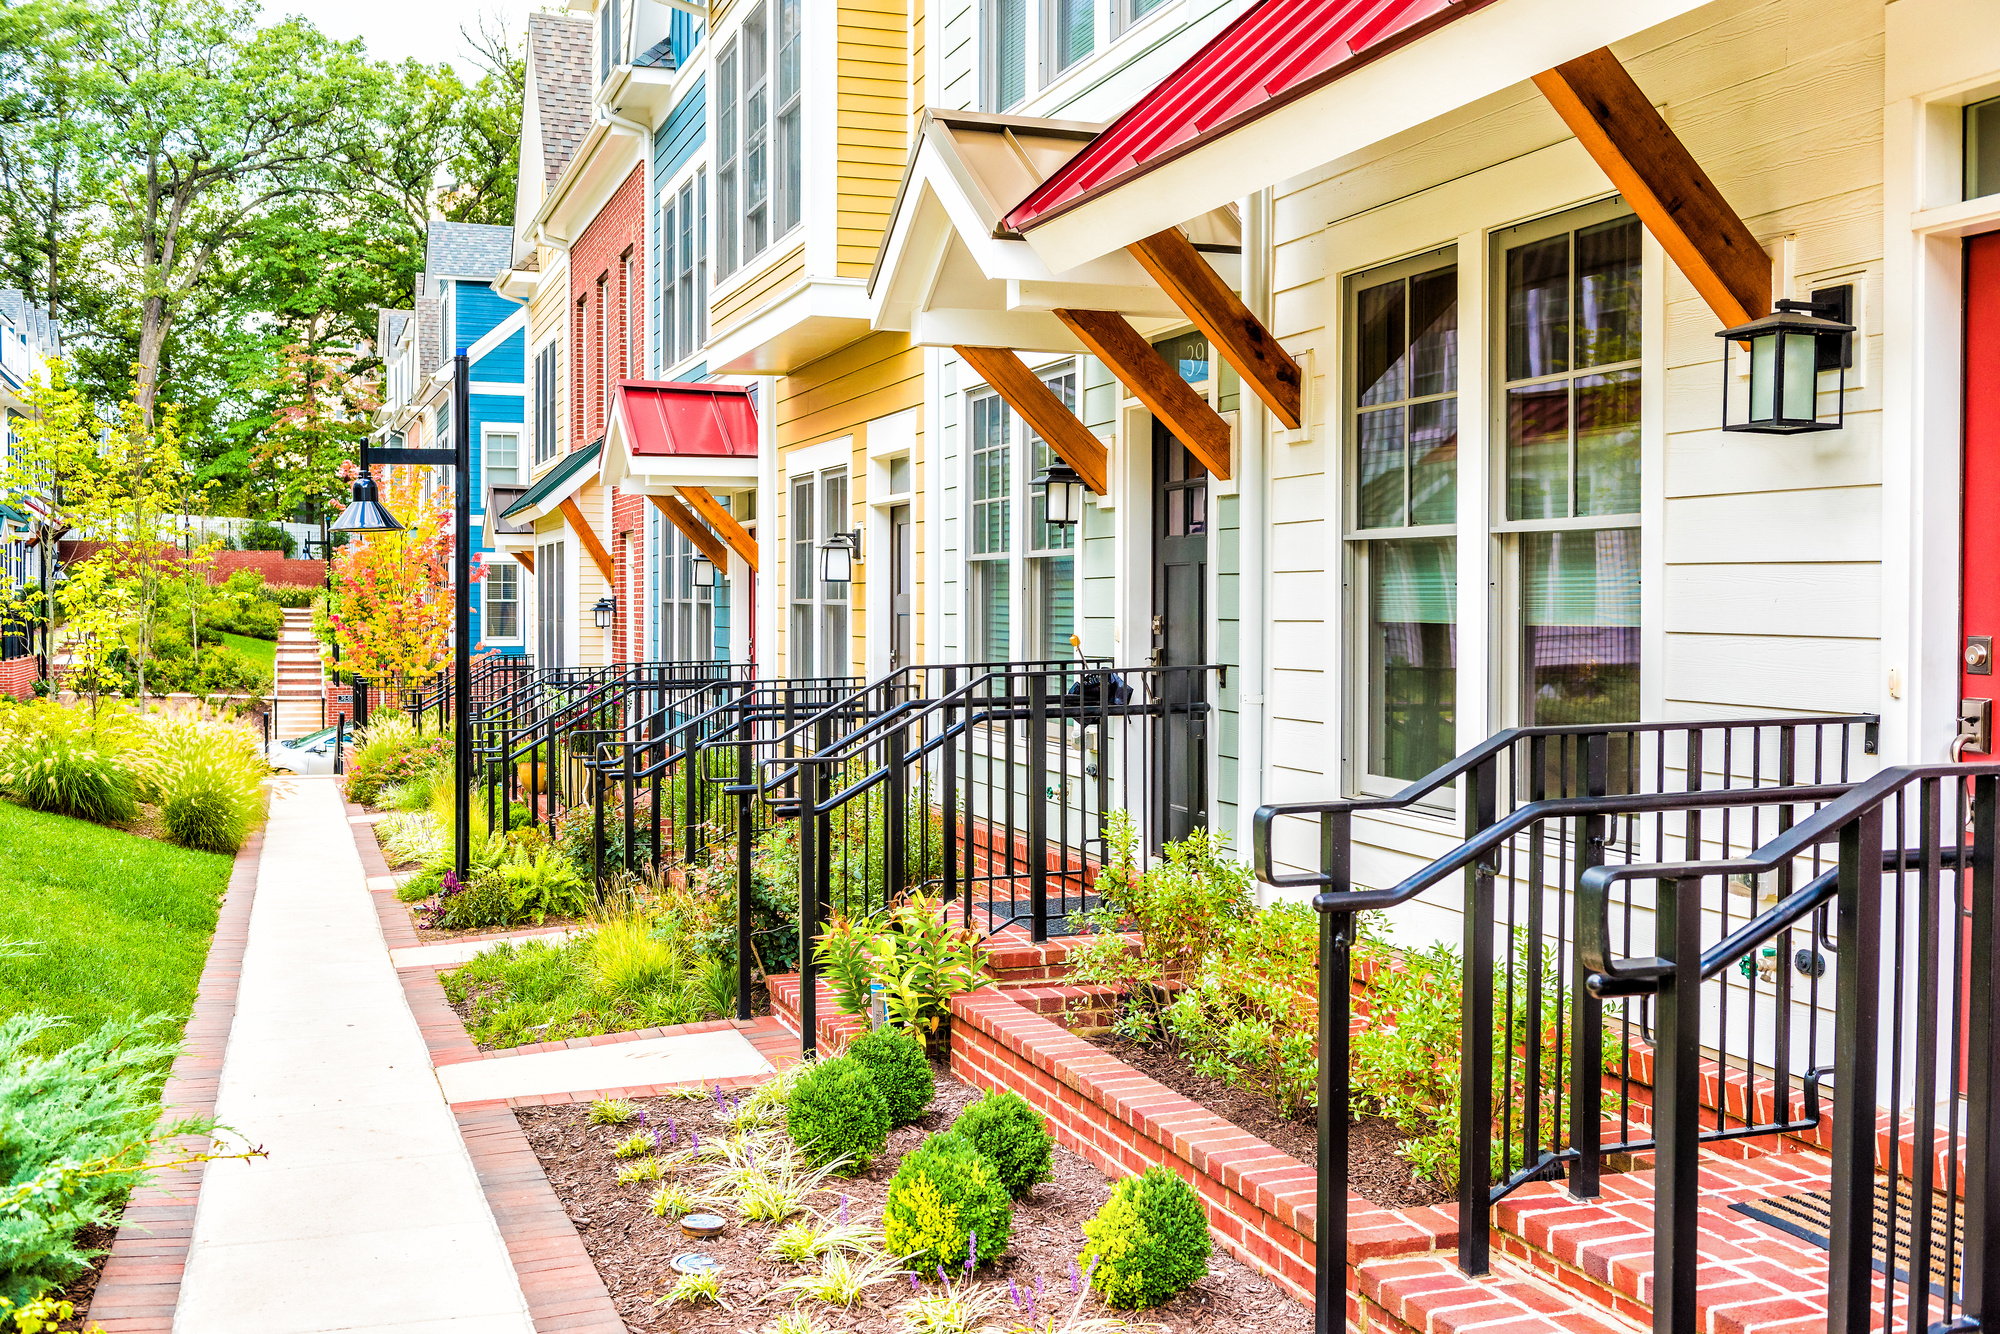 What Are the Best Tips for Working With HOA Property Managers?